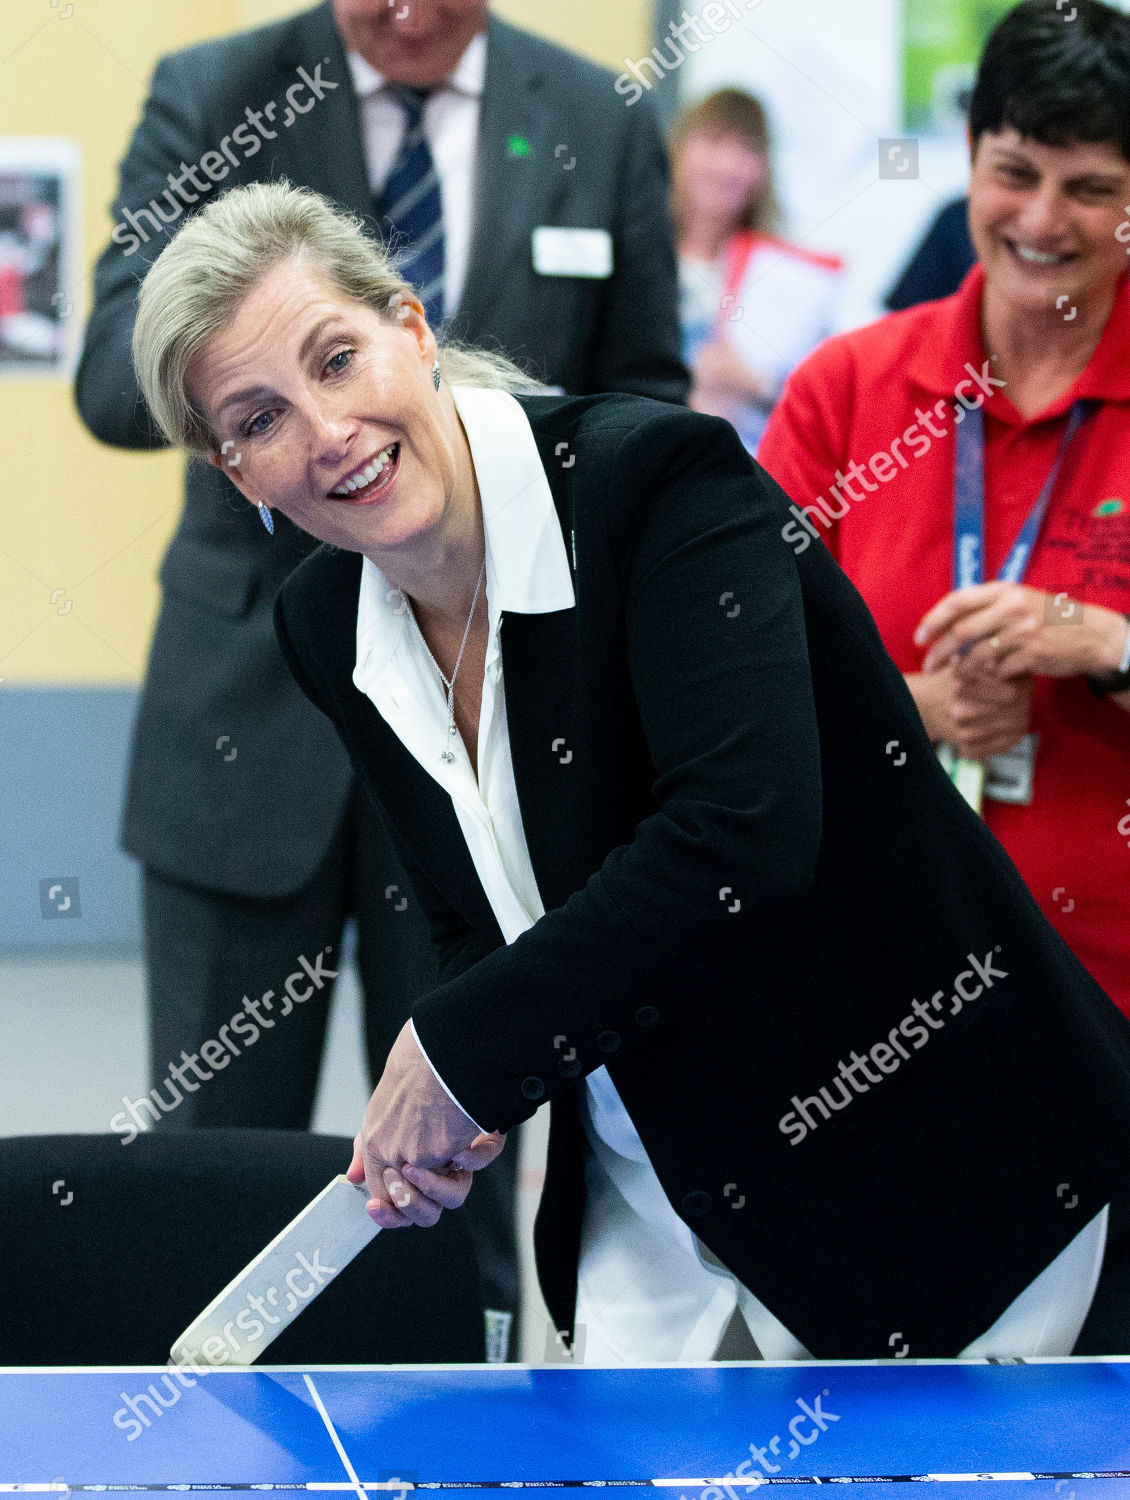 sophie-countess-of-wessex-visits-the-treloar-trust-college-holybourne-uk-shutterstock-editorial-10279529w.jpg